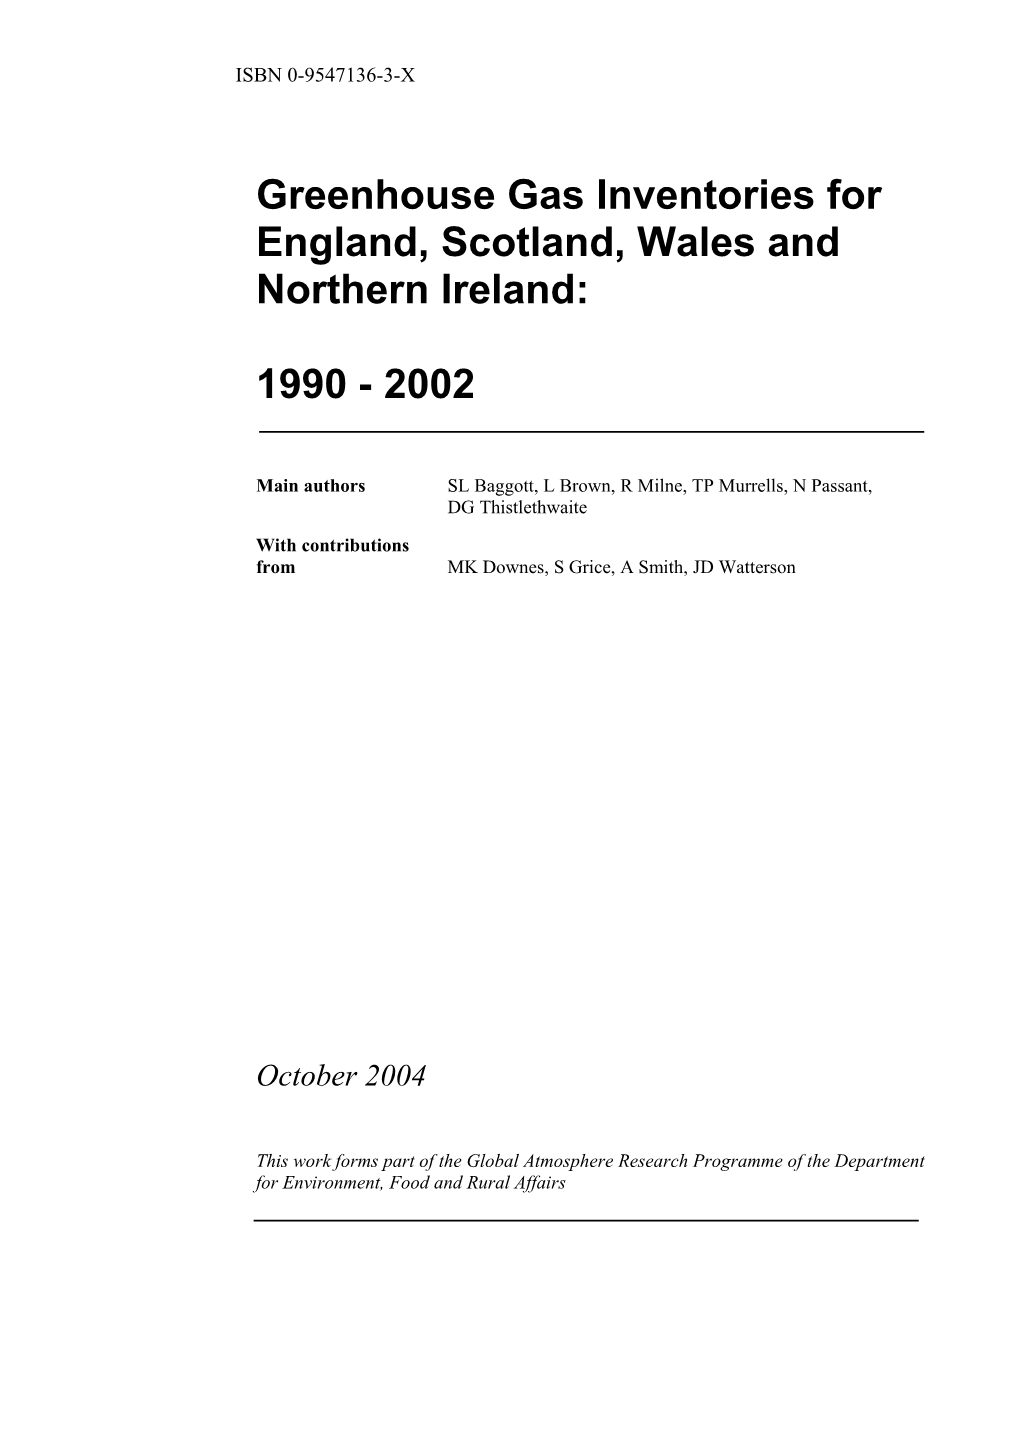 Greenhouse Gas Inventories, for England, Scotland, Wales and Northern Ireland